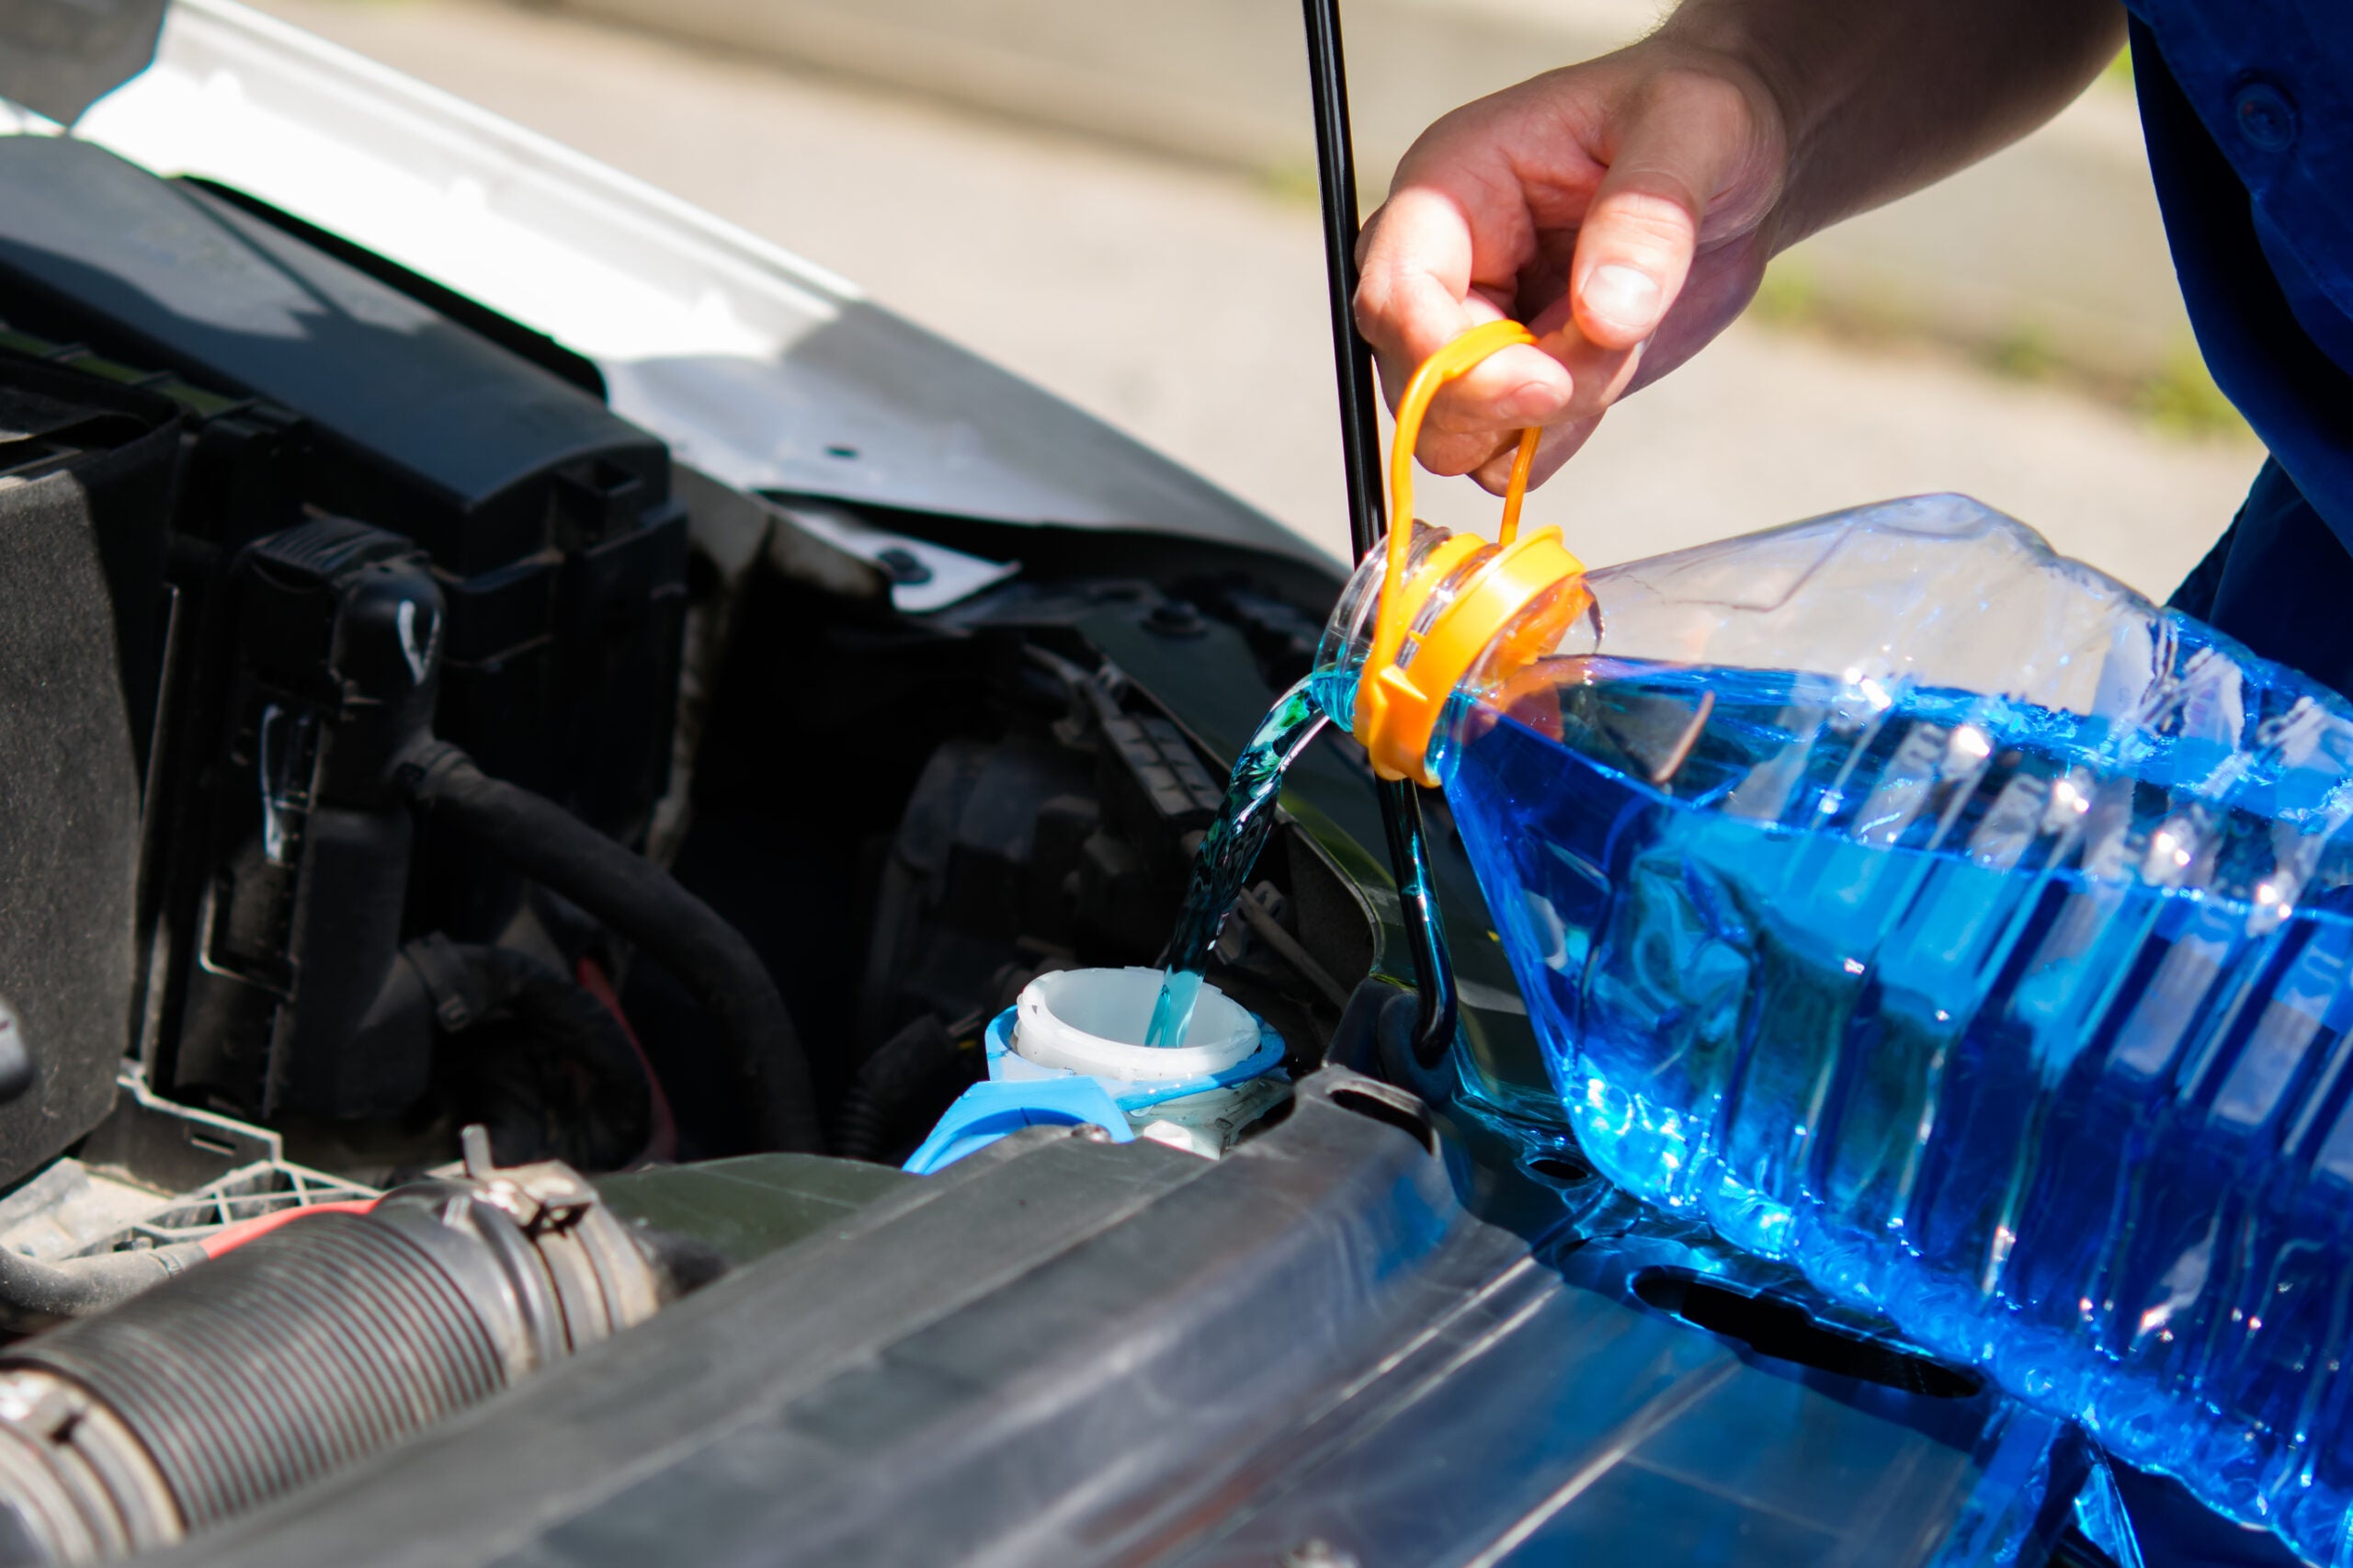 Adding stuff to windshield washer fluid: Good idea or not?